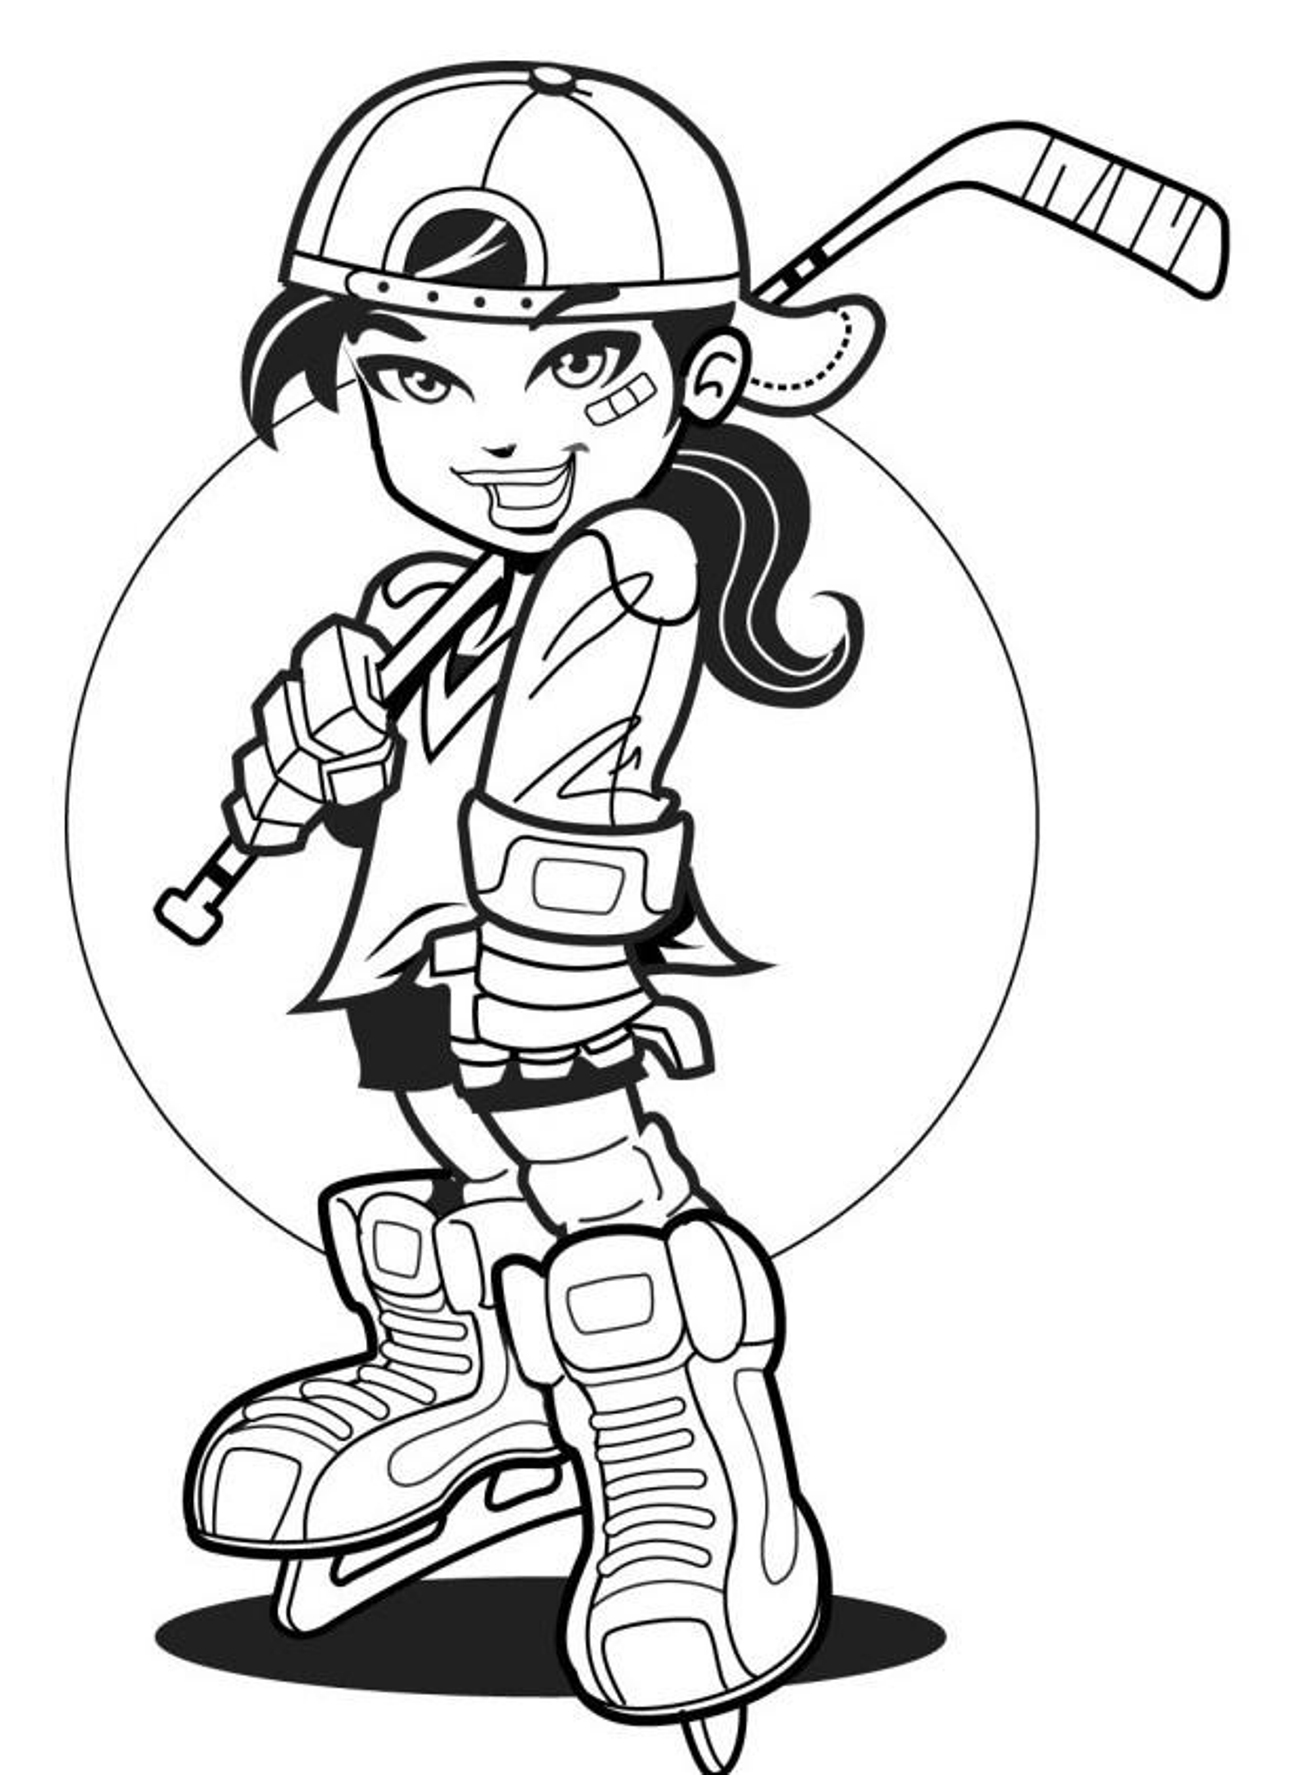 Player Girl Hockey Coloring Page